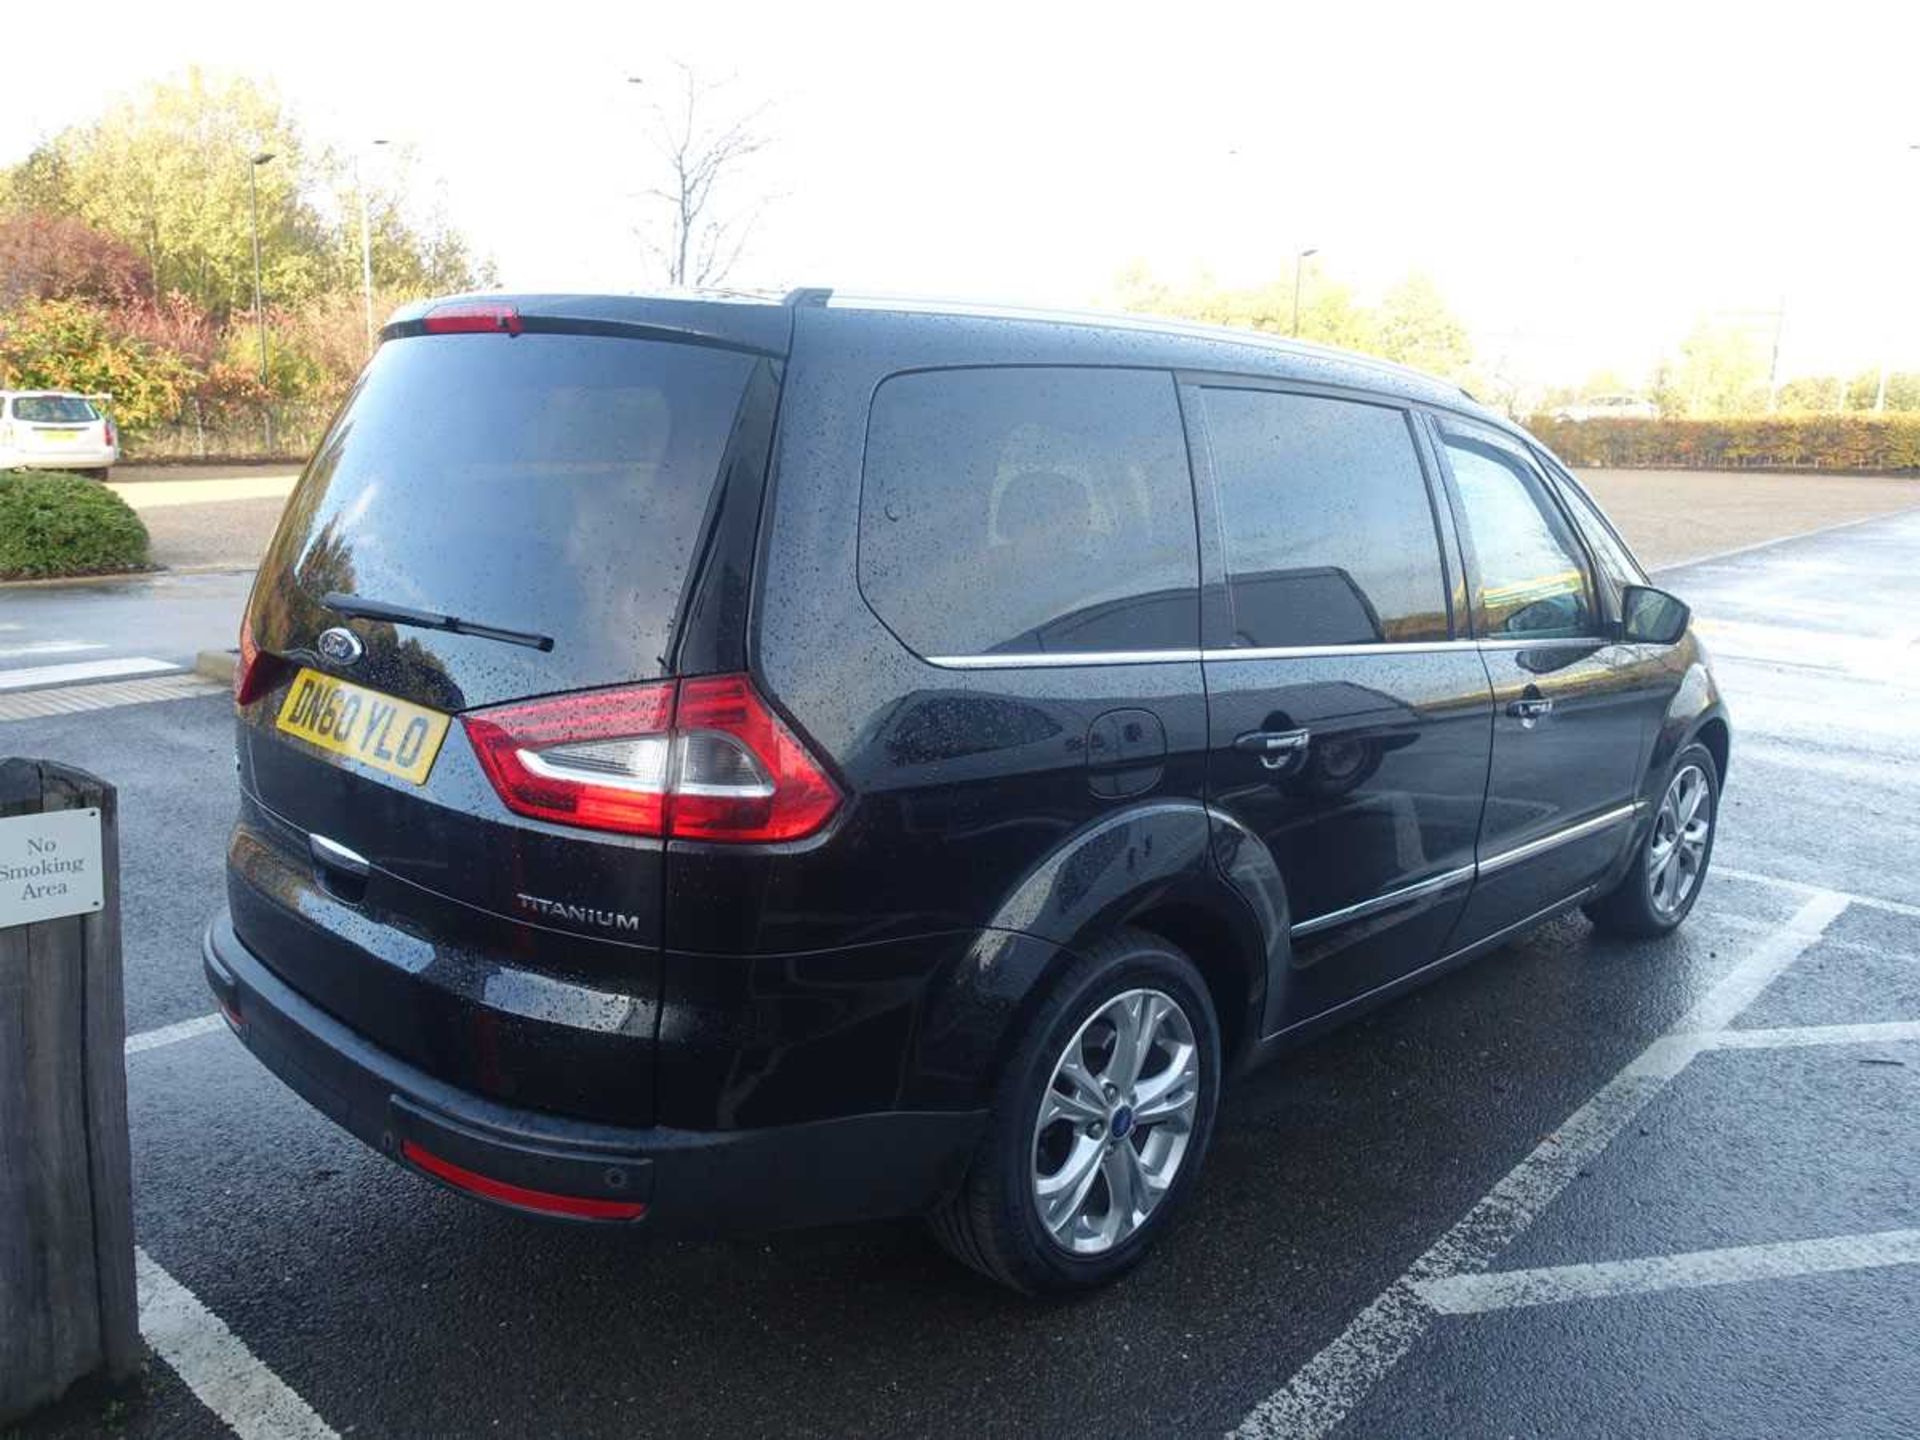 (DN60 YLO) Ford Galaxy Titanium X in black, first registered 10/01/2011, registration plate DN60 - Image 5 of 13